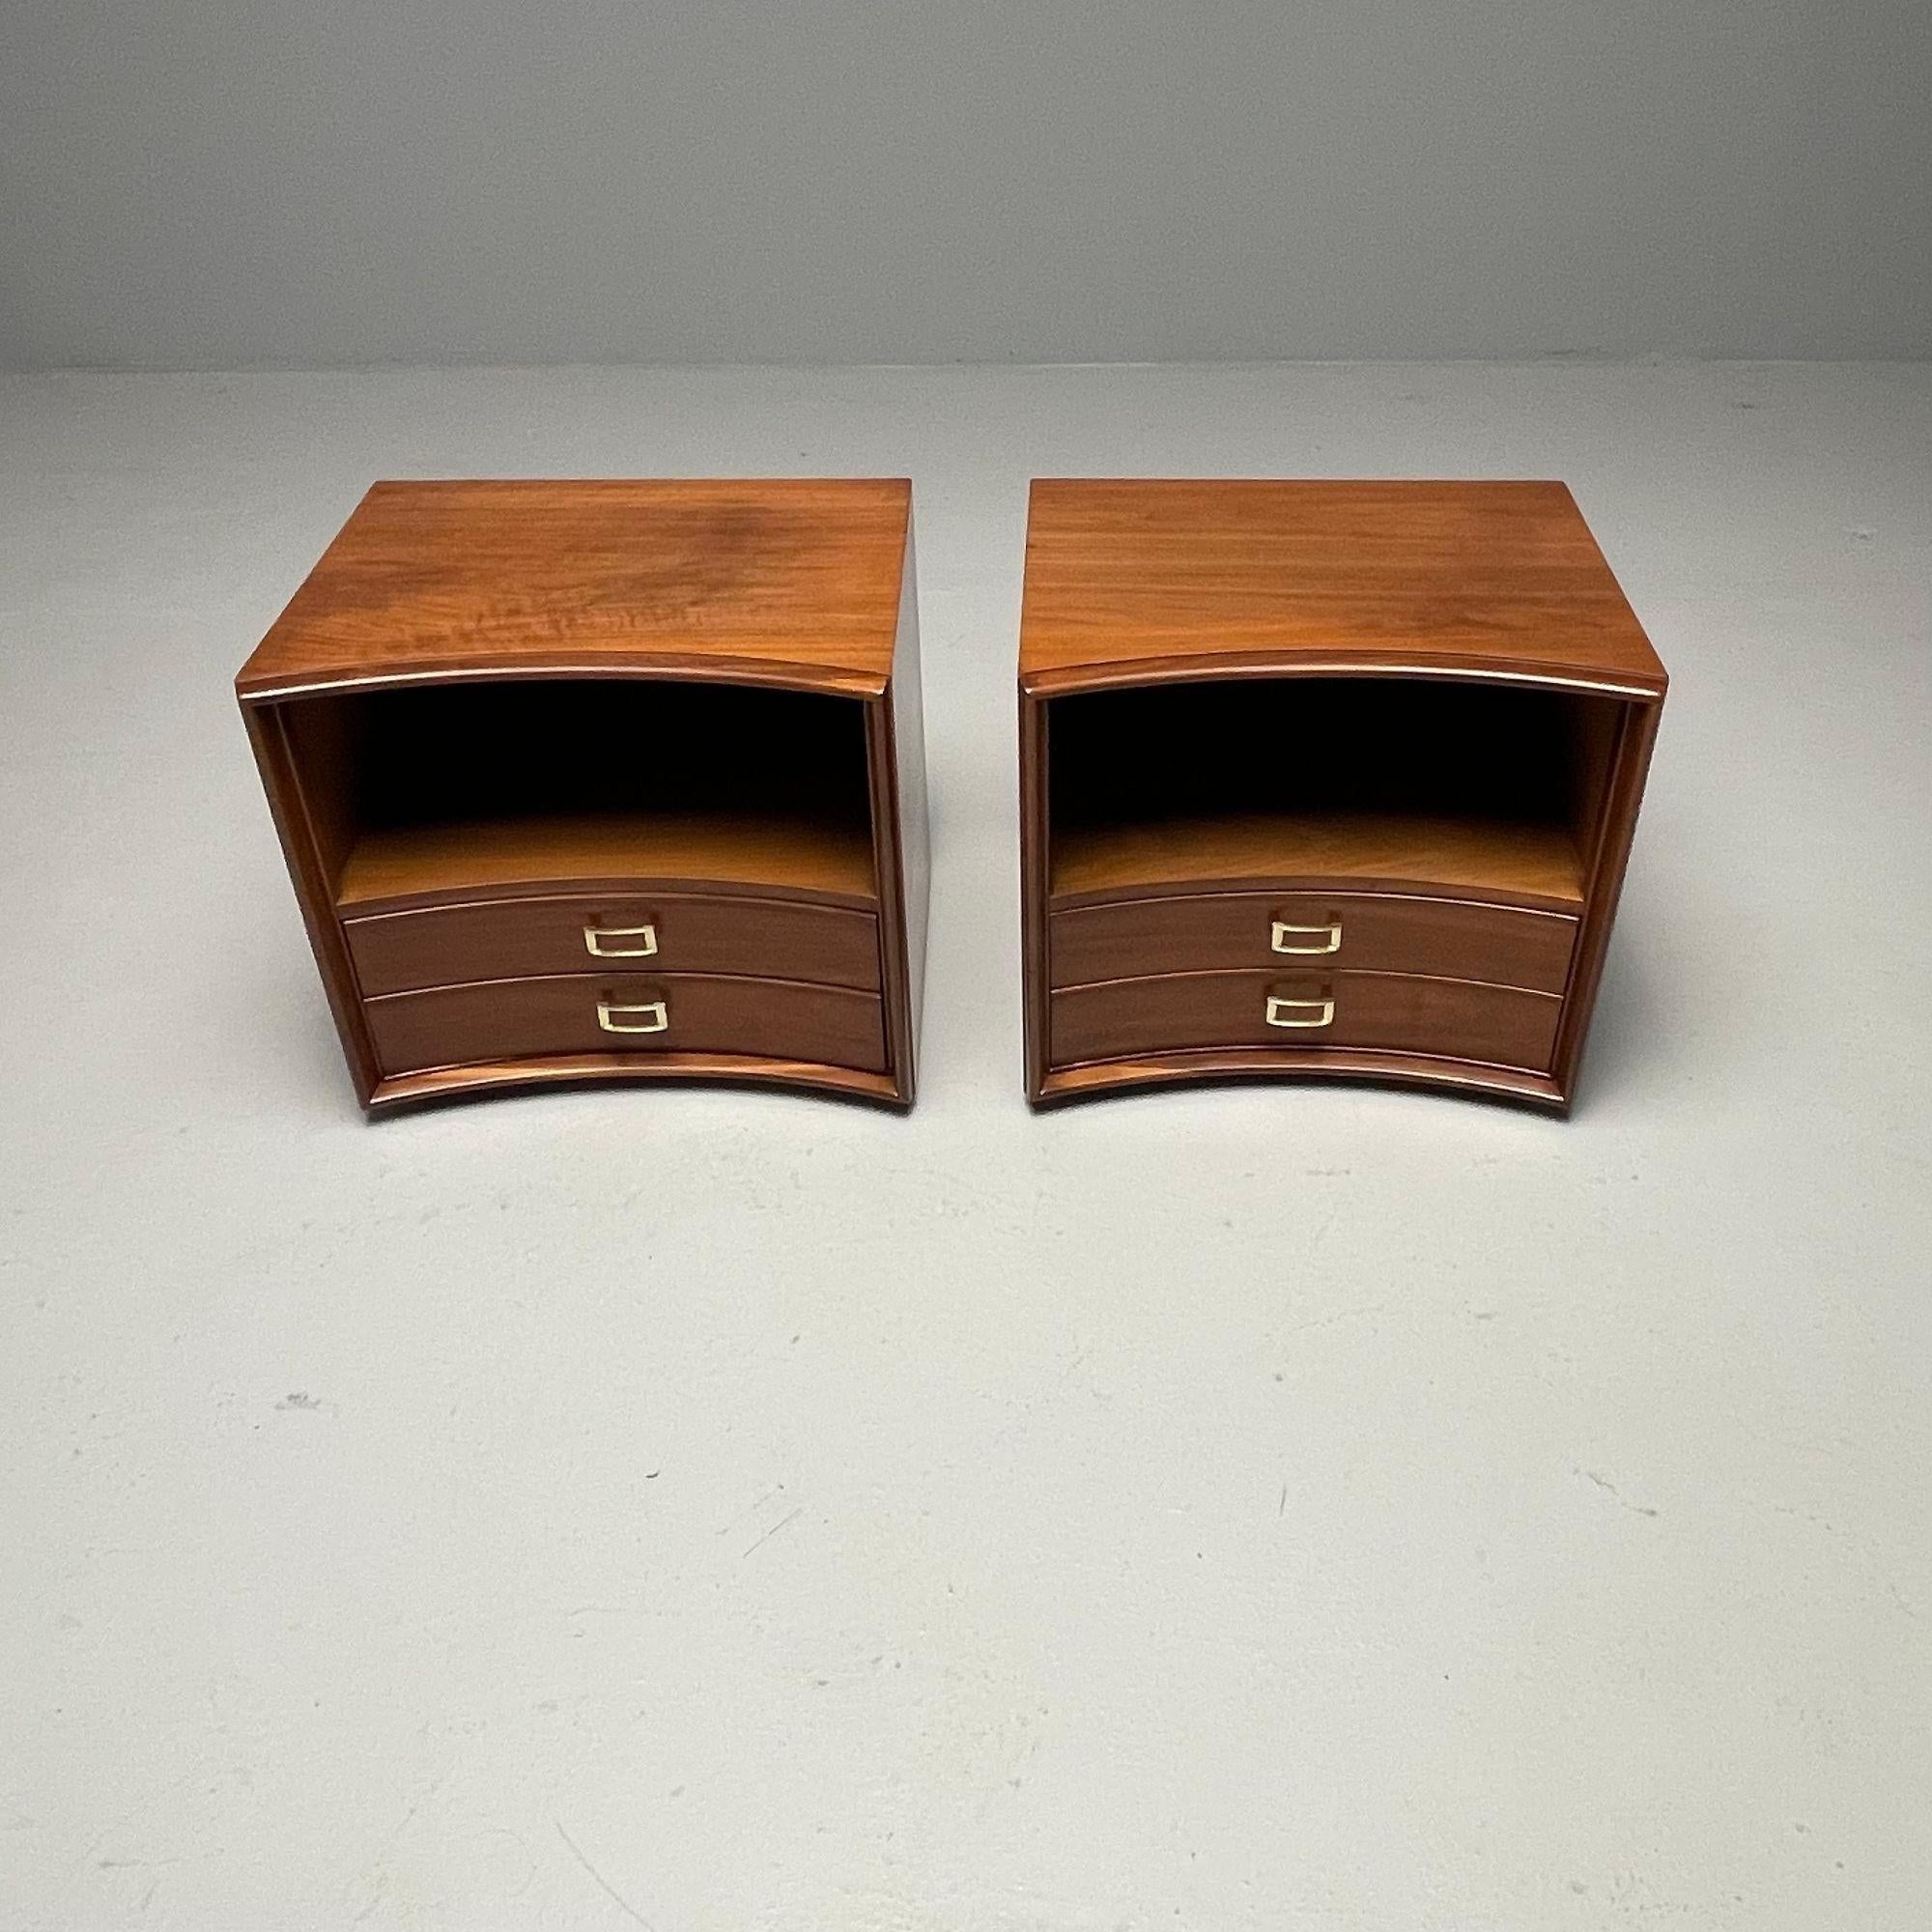 American Paul Frankl, Mid-Century Modern, Concave Nightstands, Walnut, Brass, USA 1950s For Sale